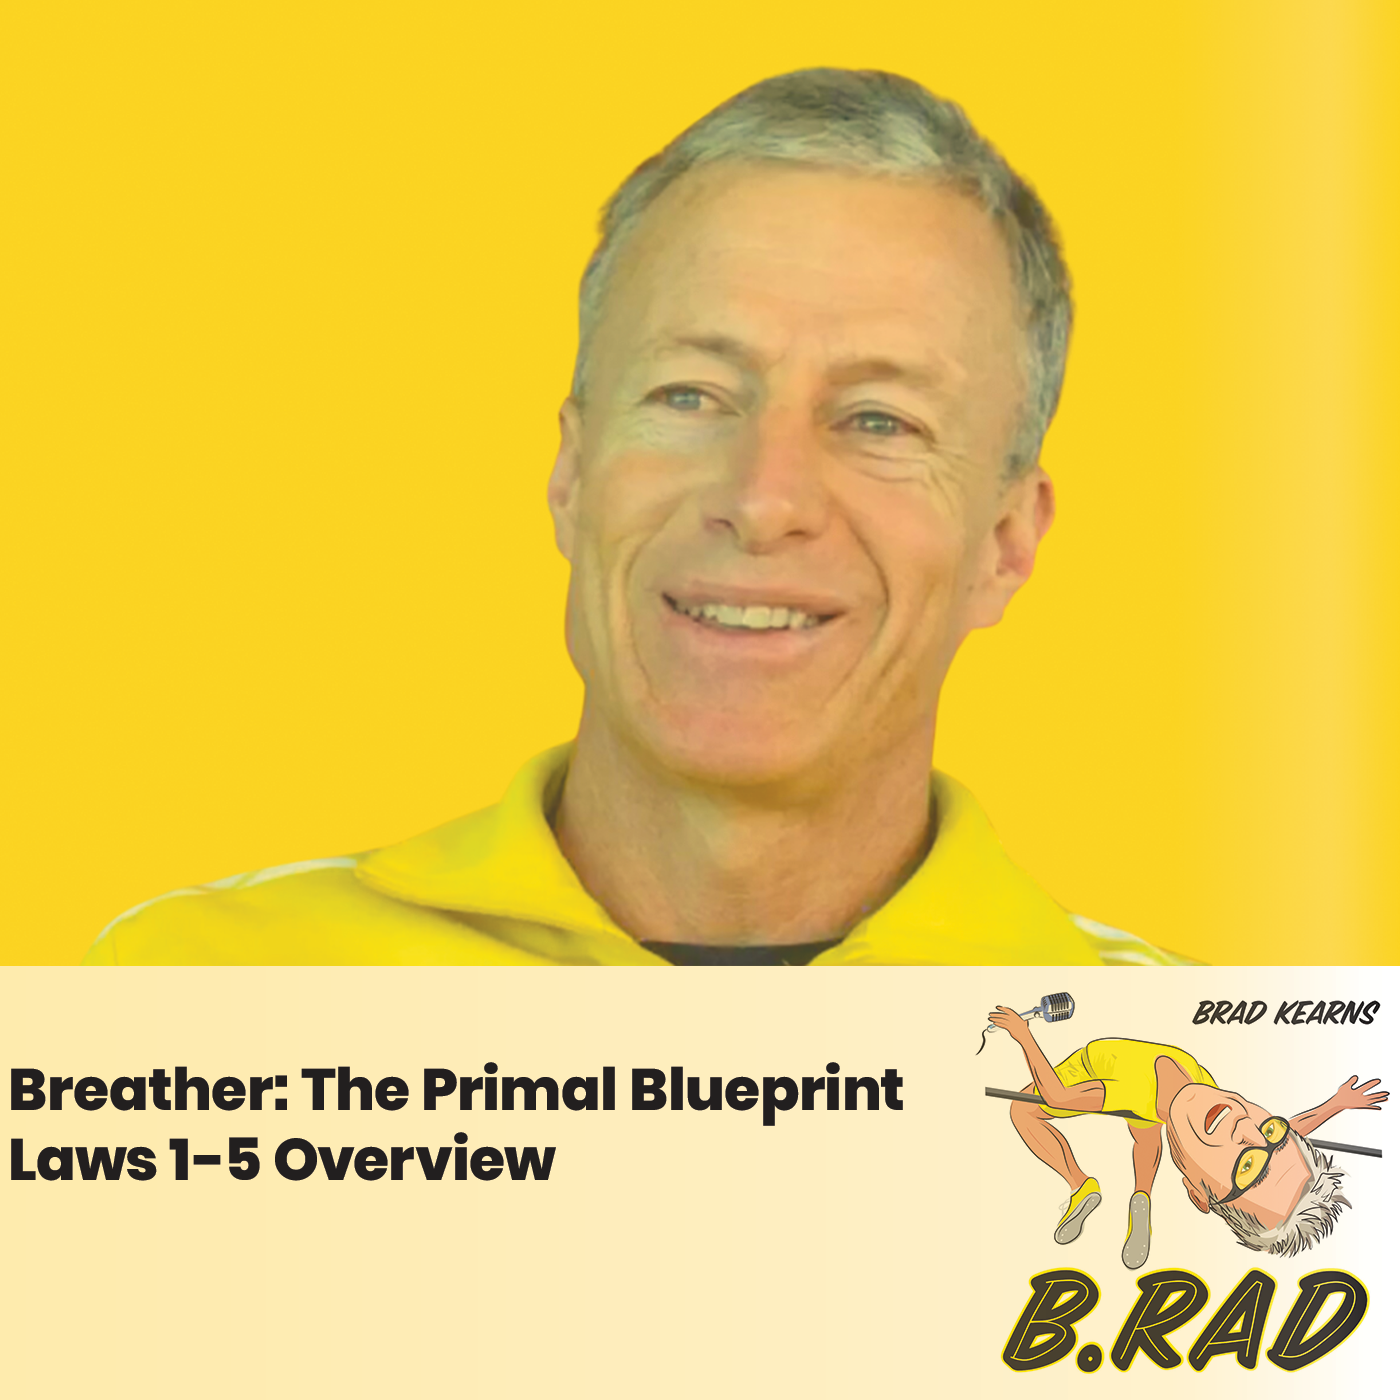 Breather: The Primal Blueprint Laws 1-5 Overview